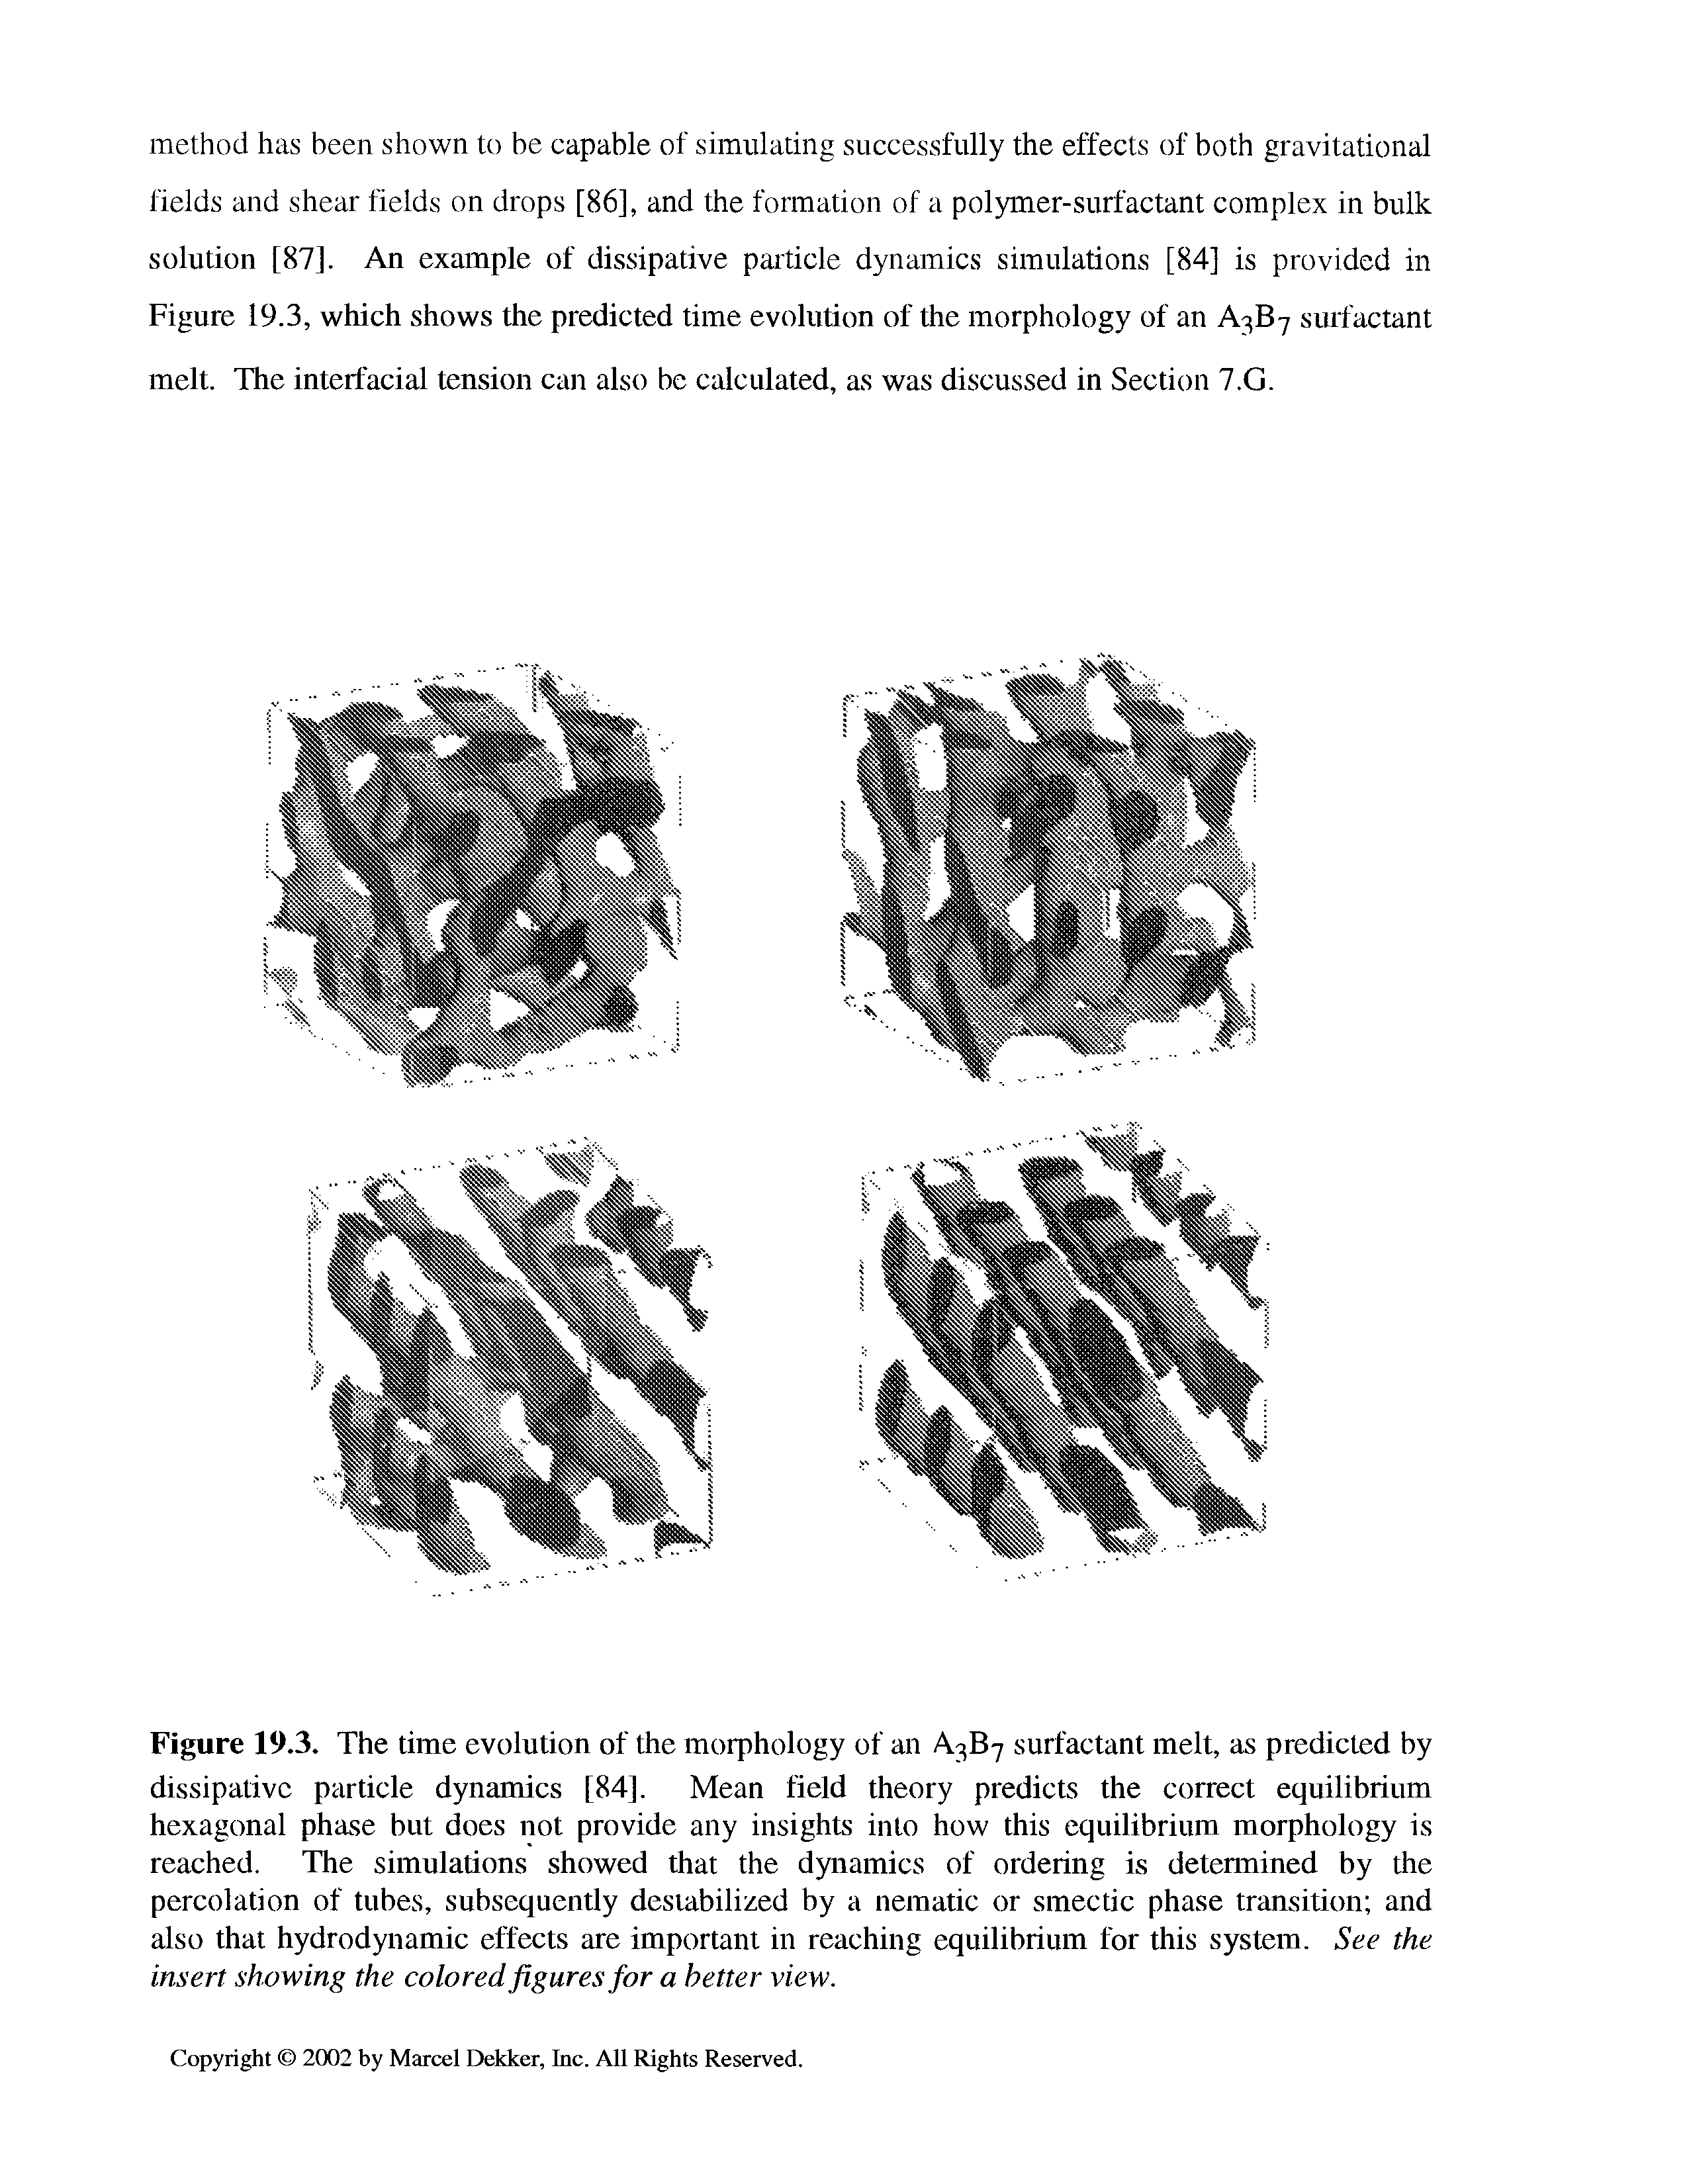 Figure 19.3. The time evolution of the morphology of an A3B7 surfactant melt, as predicted by dissipative particle dynamics [84], Mean field theory predicts the correct equilibrium hexagonal phase but does not provide any insights into how this equilibrium morphology is reached. The simulations showed that the dynamics of ordering is determined by the percolation of tubes, subsequently destabilized by a nematic or smectic phase transition and also that hydrodynamic effects are important in reaching equilibrium for this system. See the insert showing the colored figures for a better view.